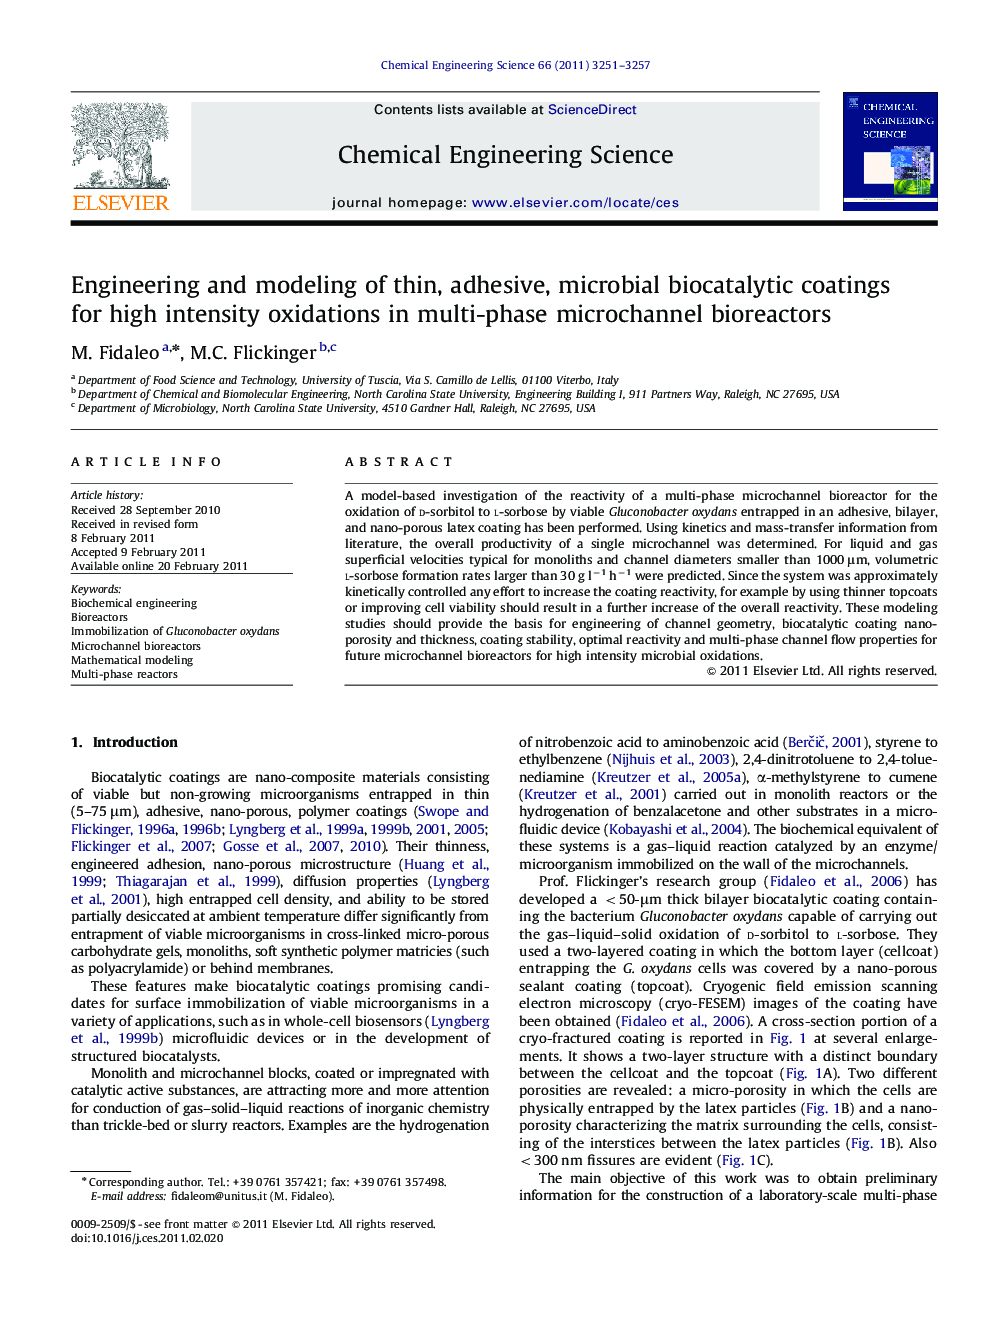 Engineering and modeling of thin, adhesive, microbial biocatalytic coatings for high intensity oxidations in multi-phase microchannel bioreactors